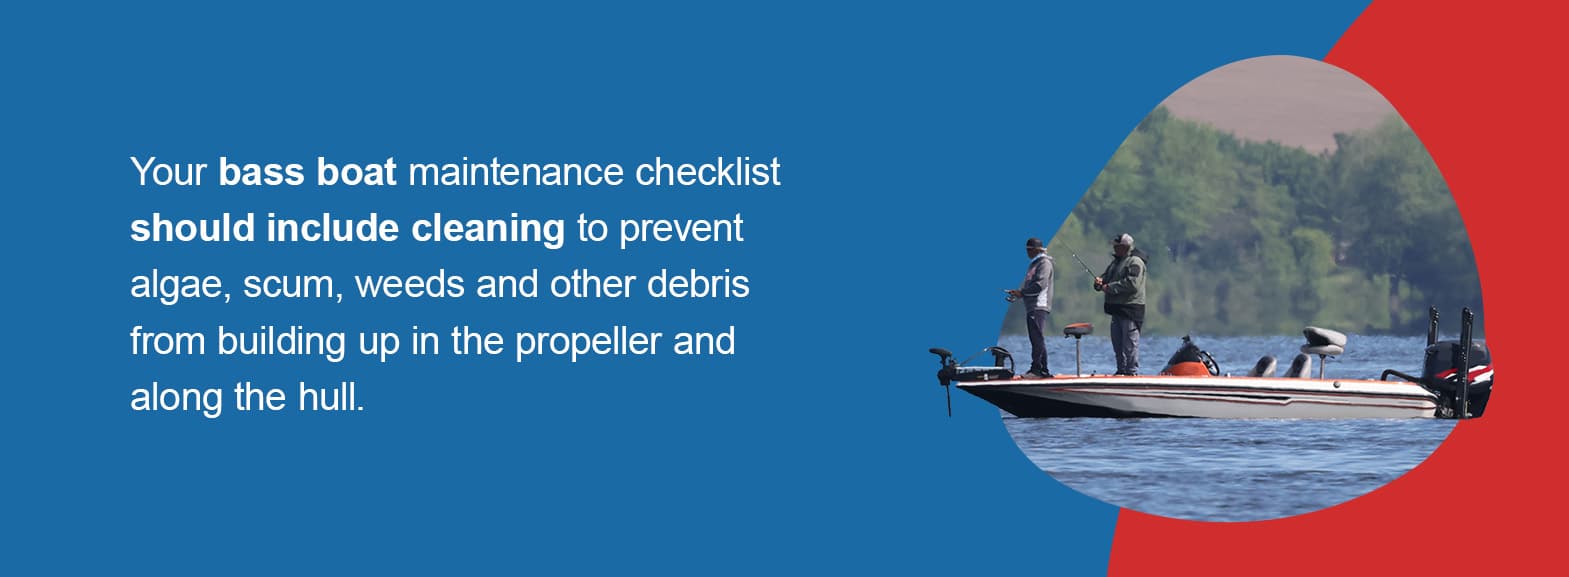 Your bass boat maintenance checklist should include cleaning to prevent algae, scum, weeds and other debris from building up in the propeller and along the hull.